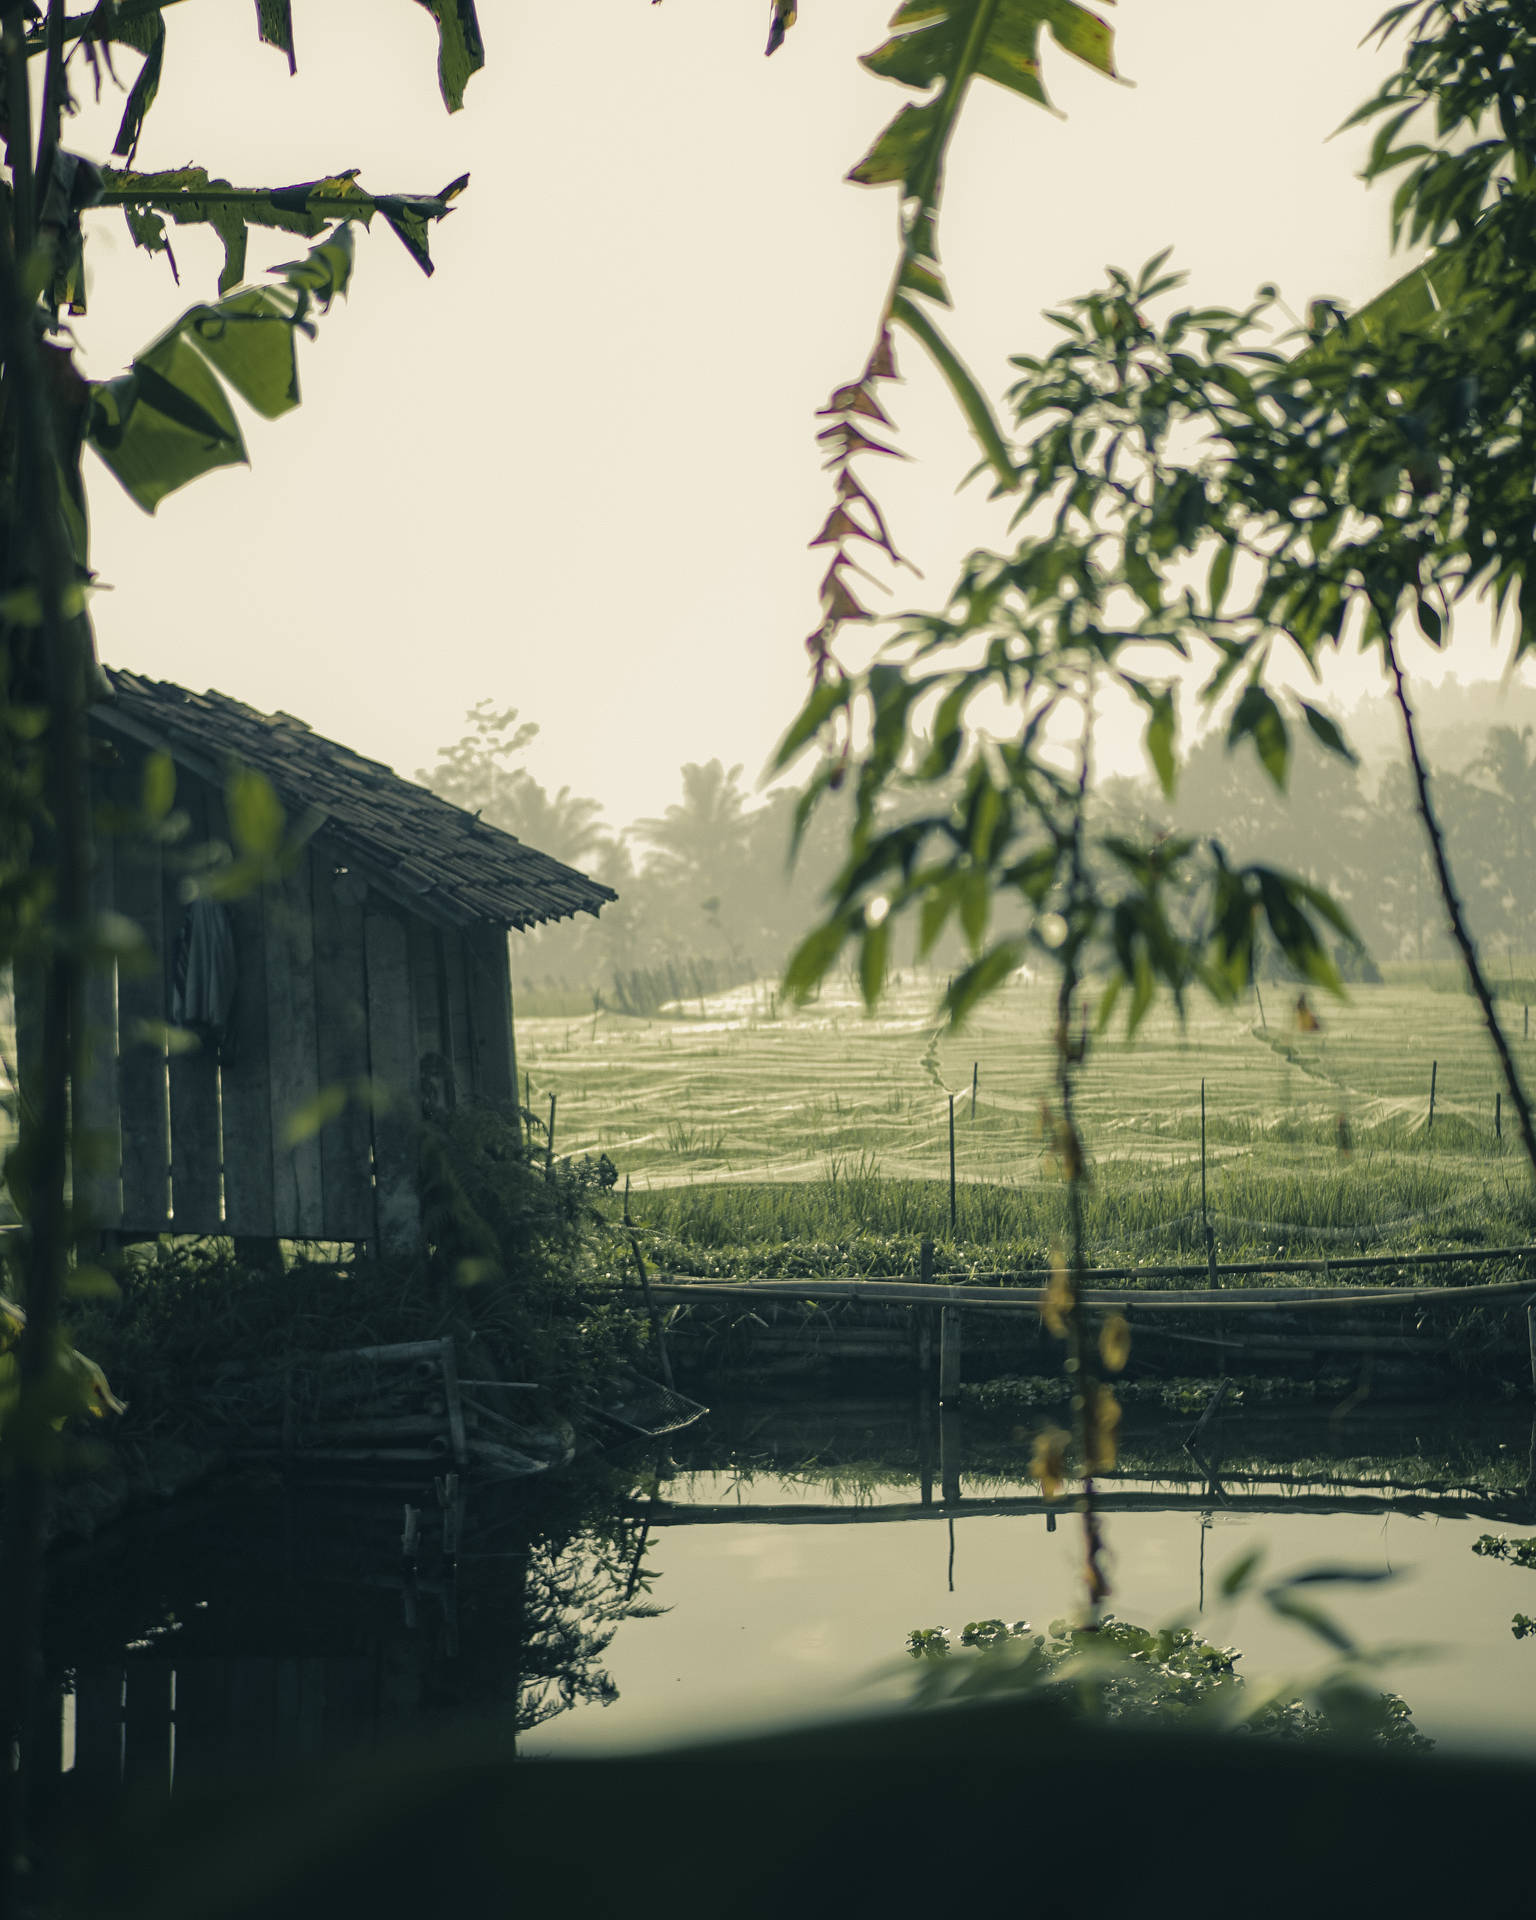 Image A Picturesque View Of The Countryside On A Rainy Day. Background